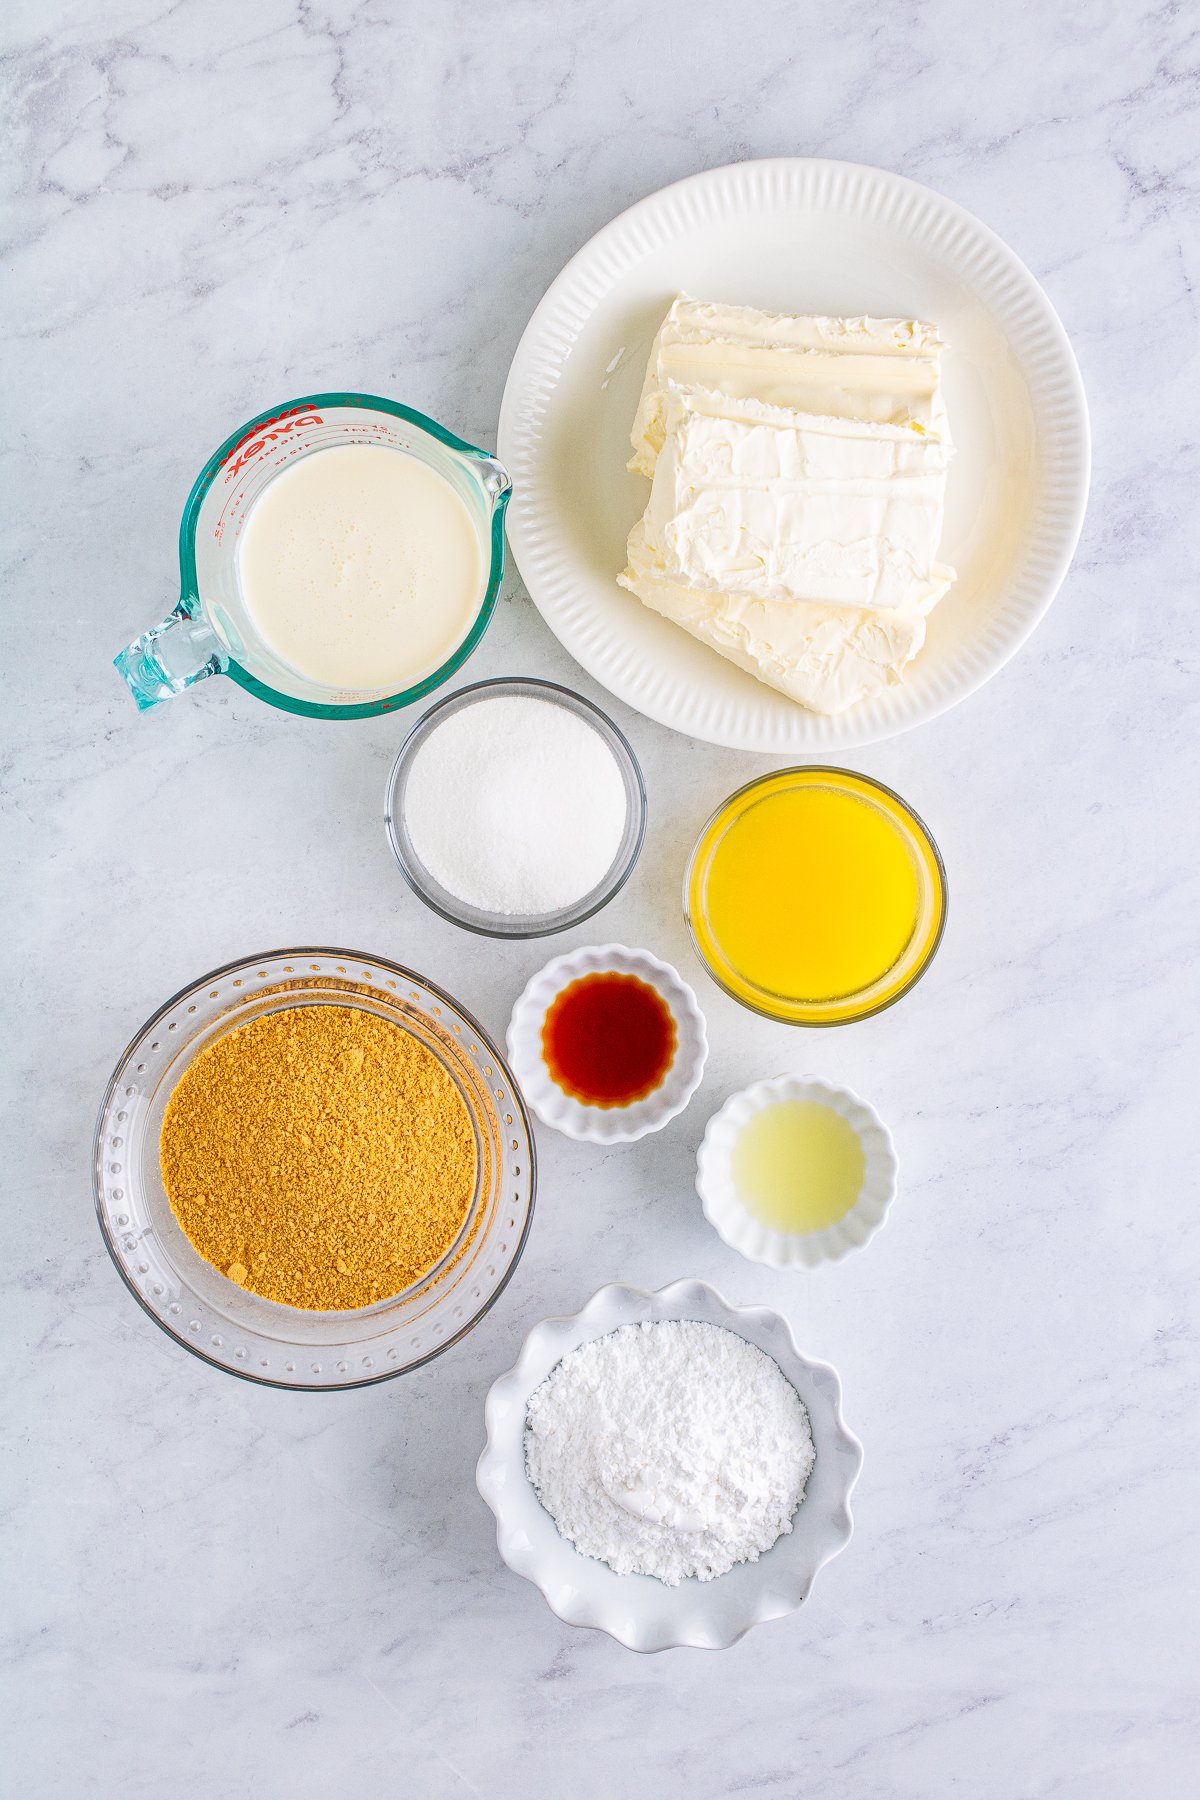 Ingredients needed to make a No Bake Cheesecake.